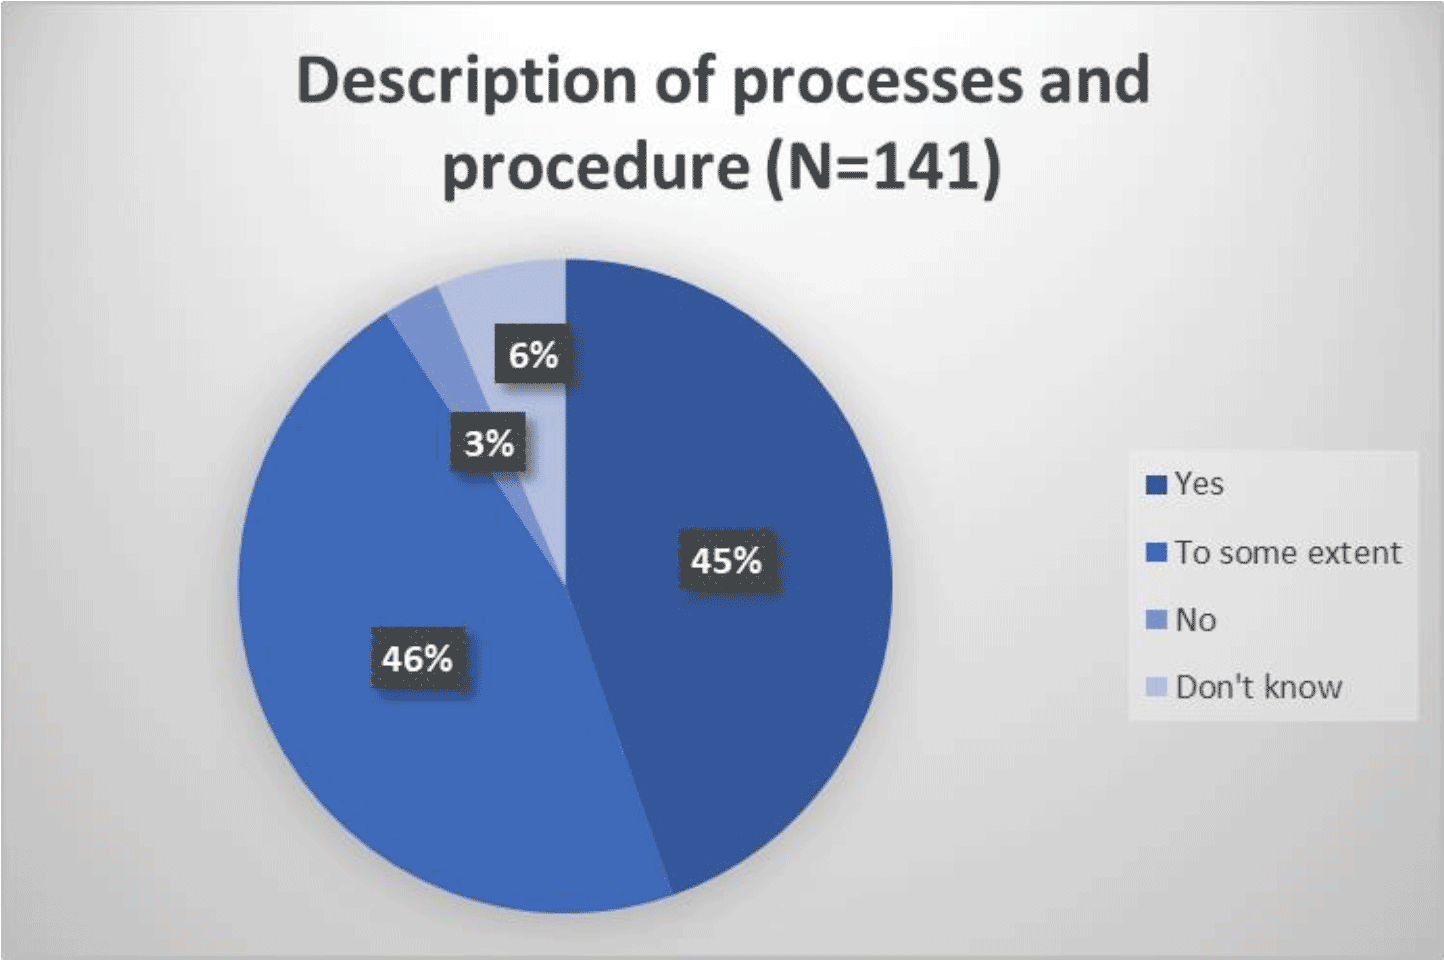 Pie chart showing responses to whether IRD processes and procedures are clearly described:
Yes 45%
To some extent 46%
No 3%
Don't know 6%